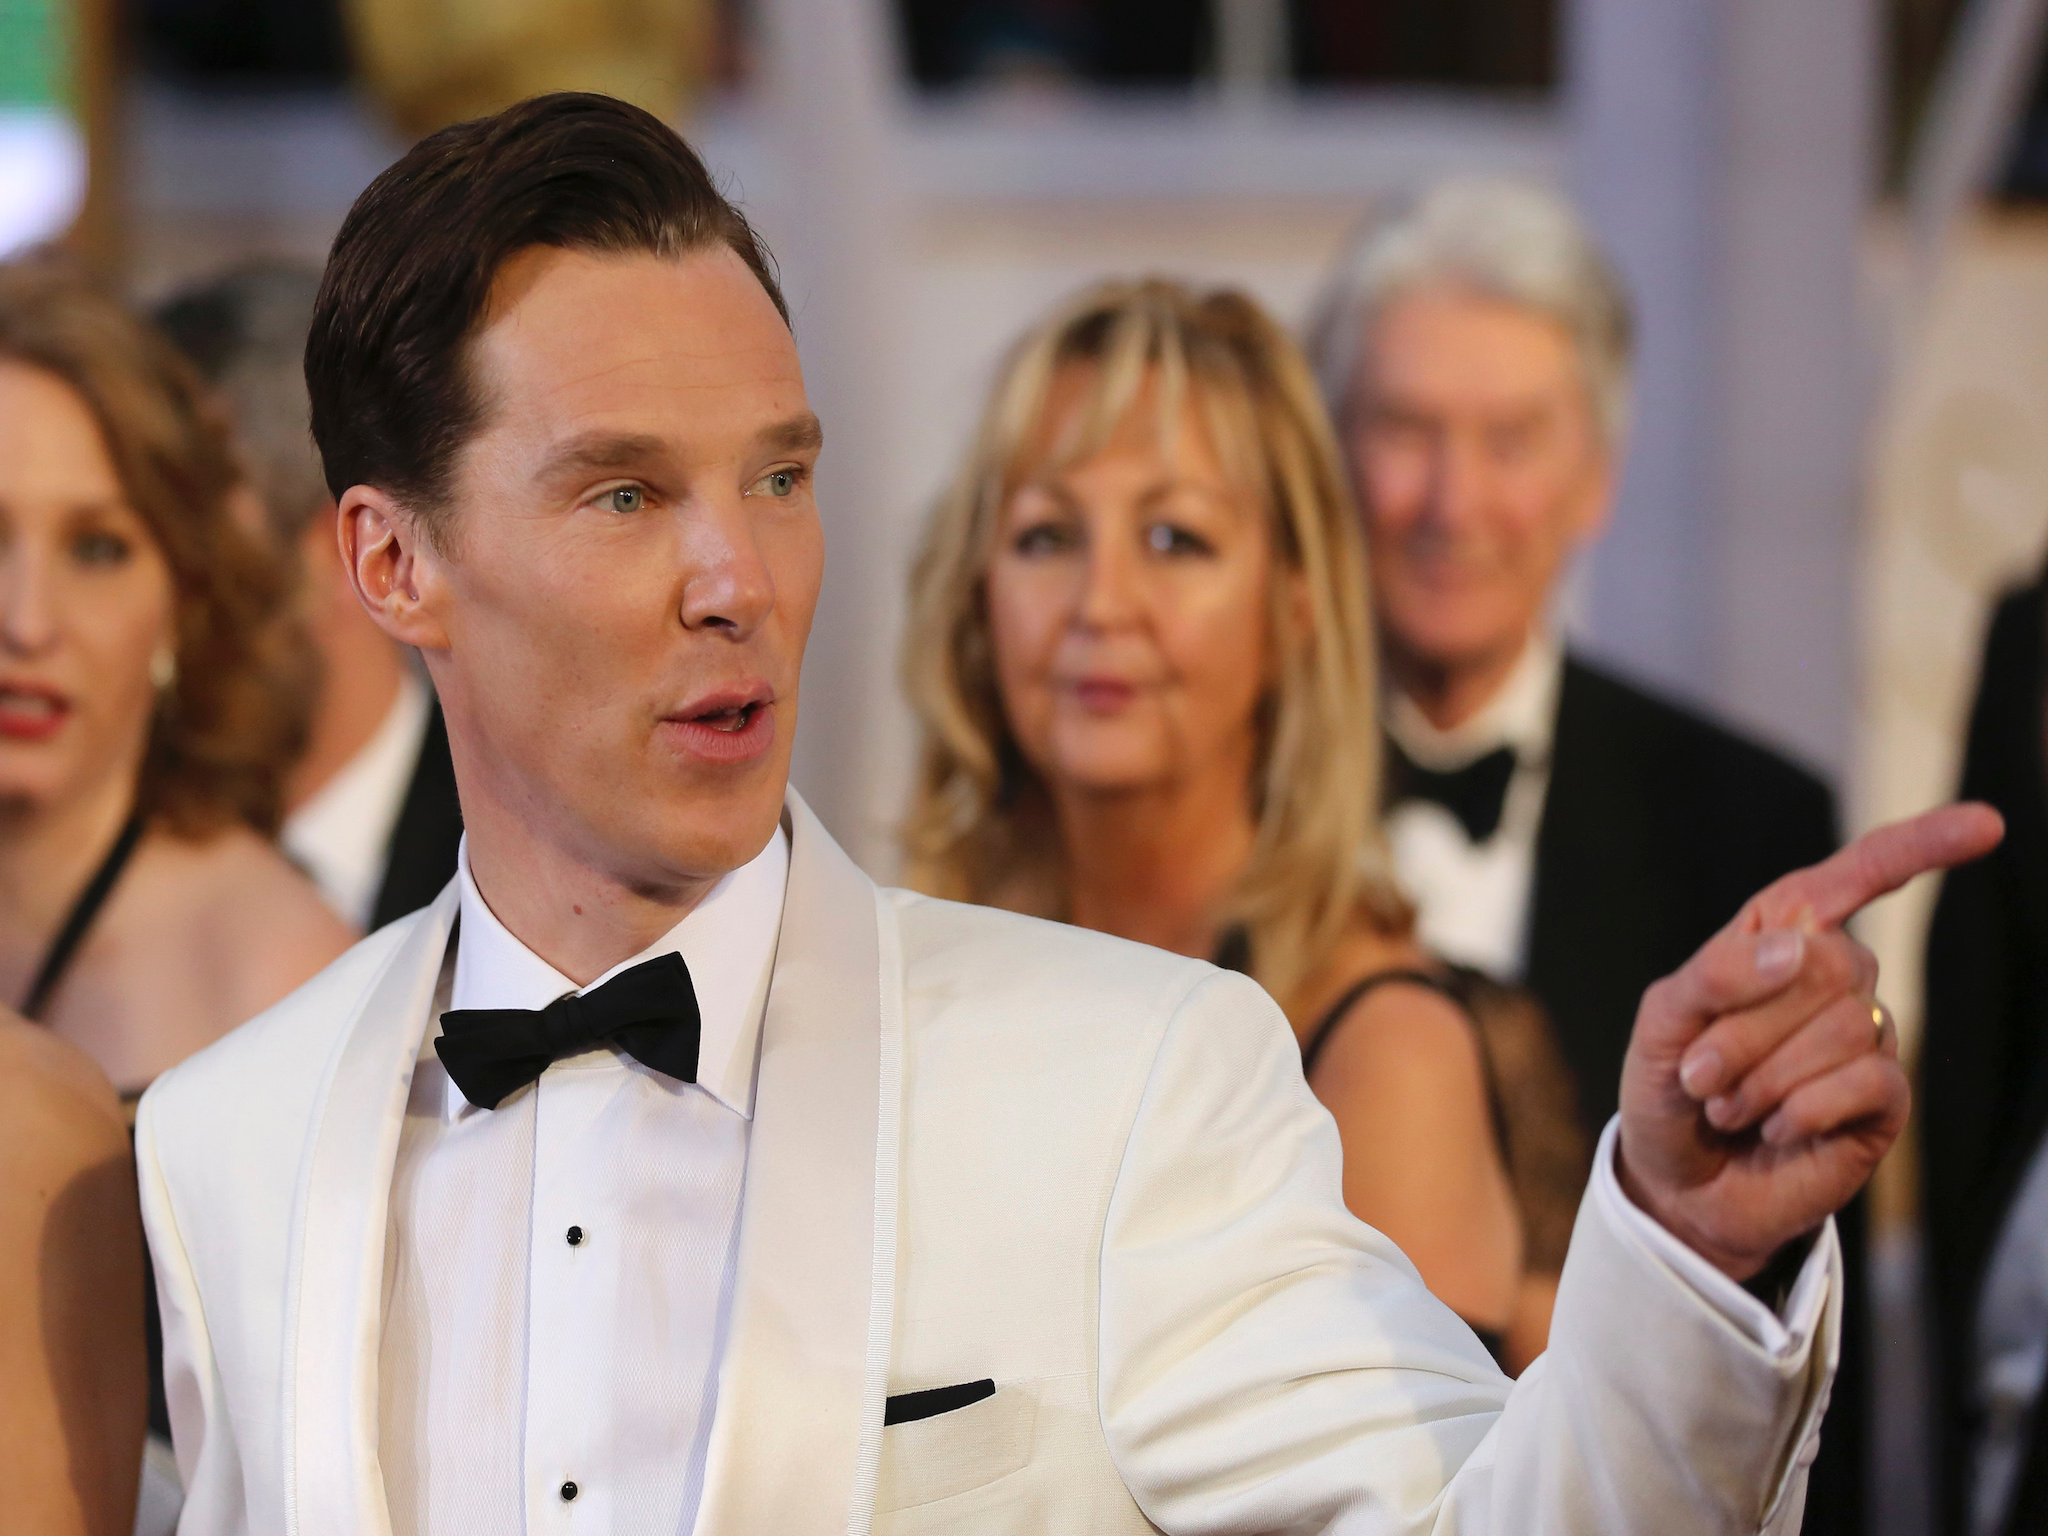 Benedict Cumberbatch was nominated for an Oscar for portraying Alan Turing in The Imitation Game'